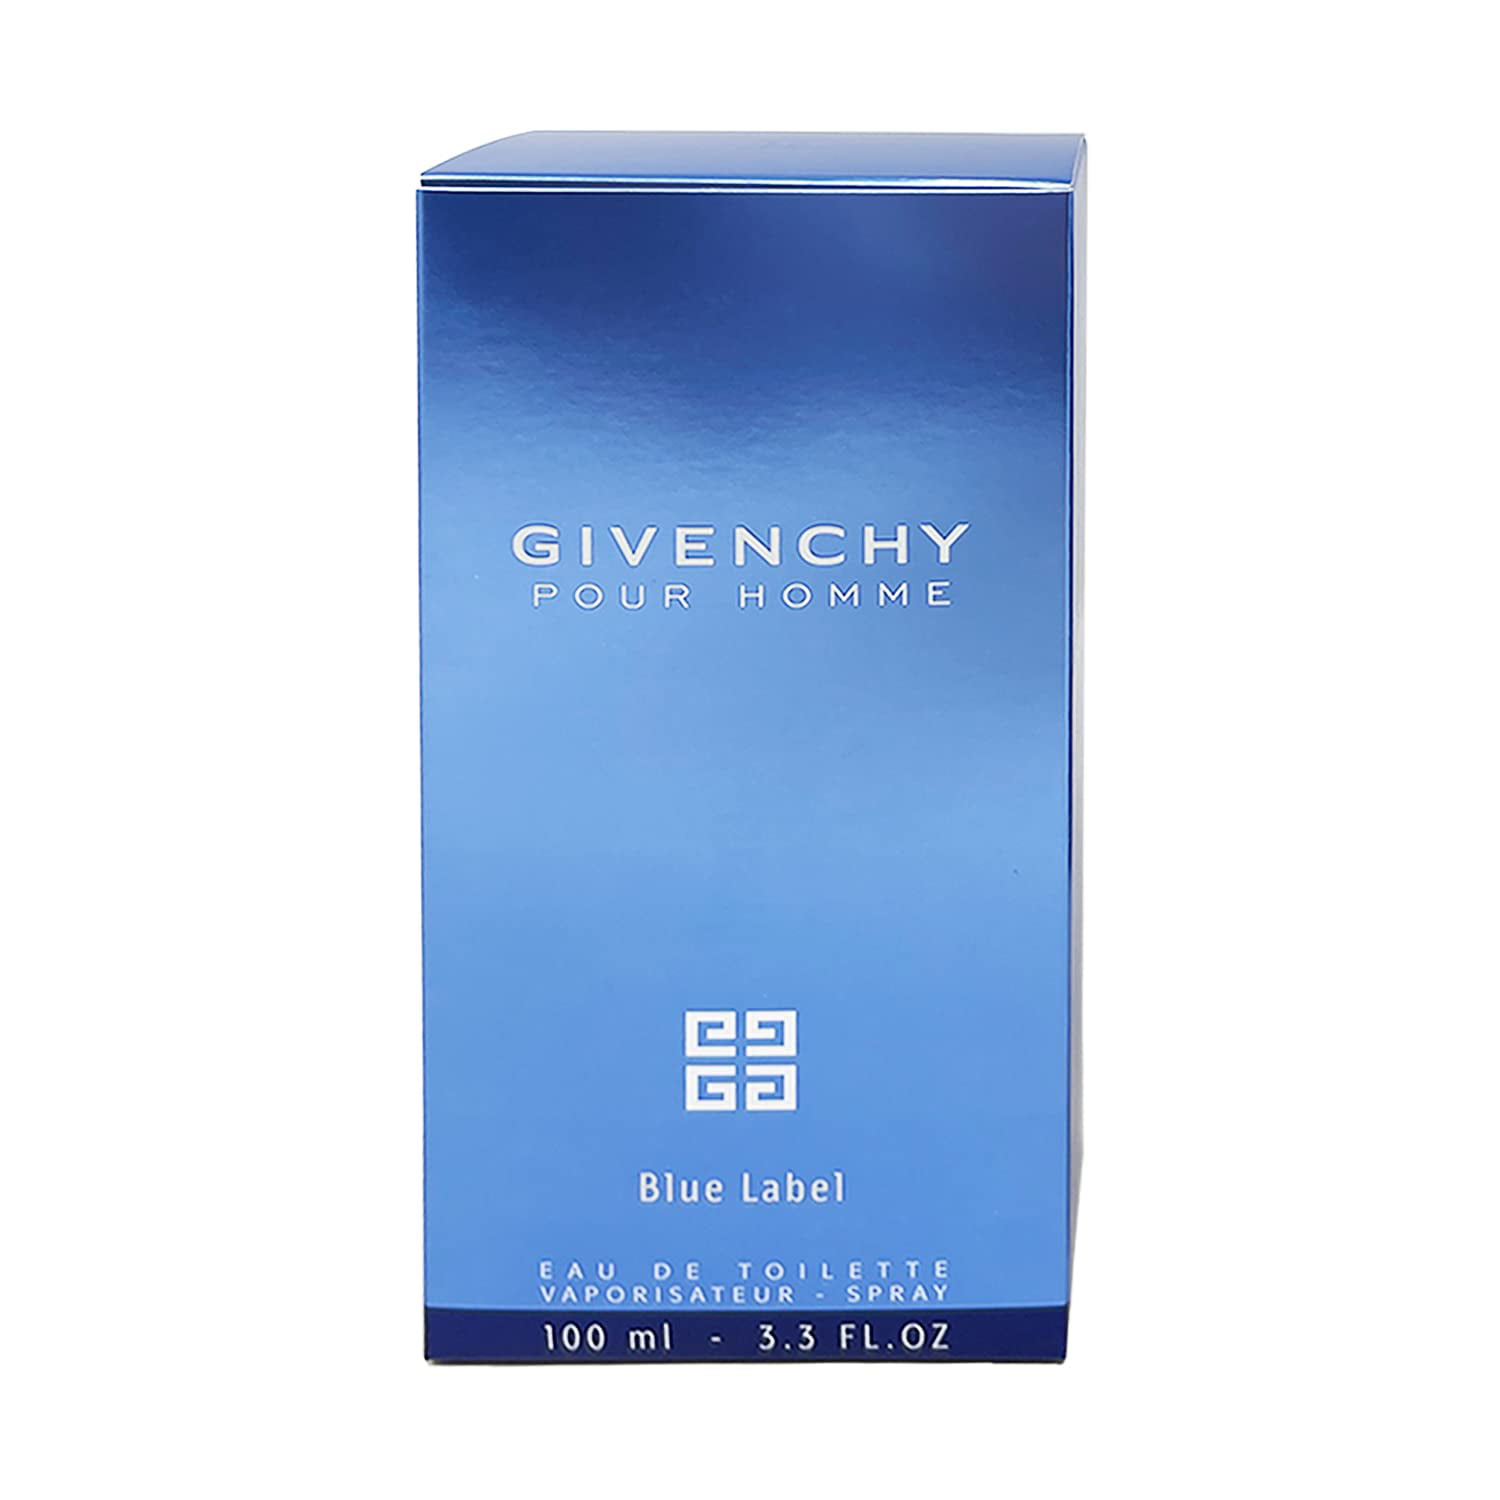 Into the Blue Givenchy perfume - a fragrance for women and men 2002